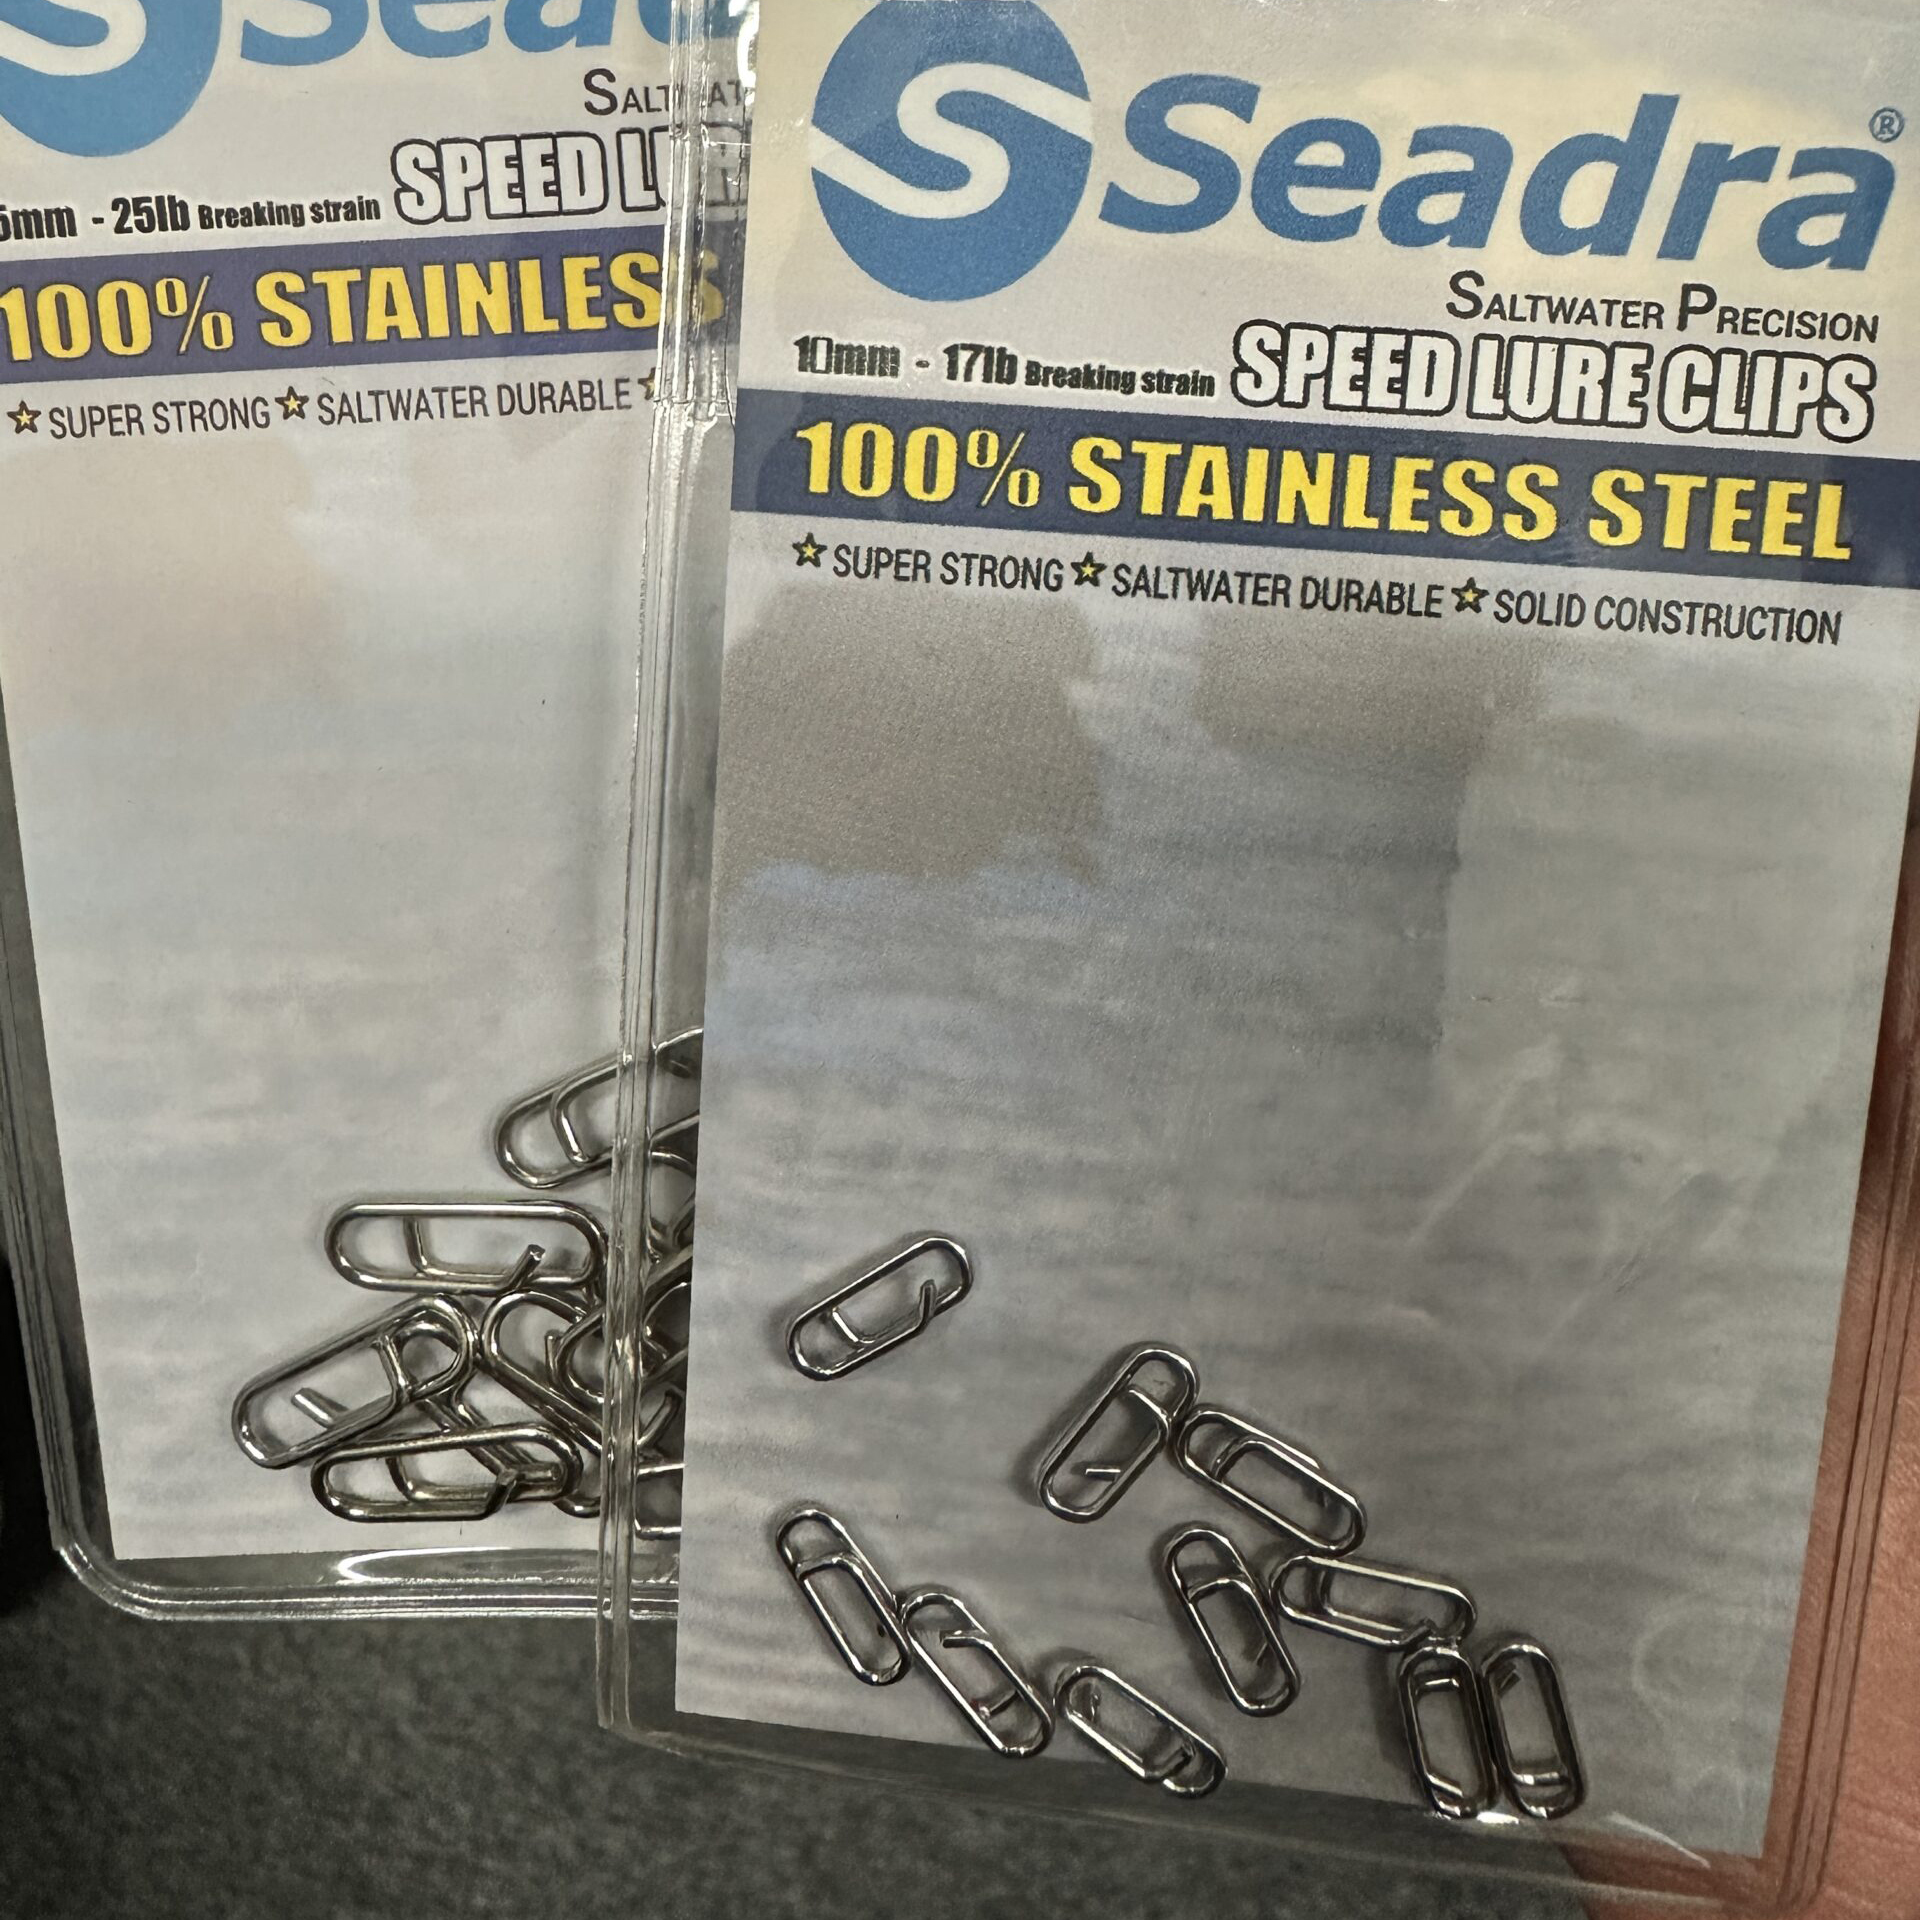 Seadra Speed Lure Clips - Veals Mail Order